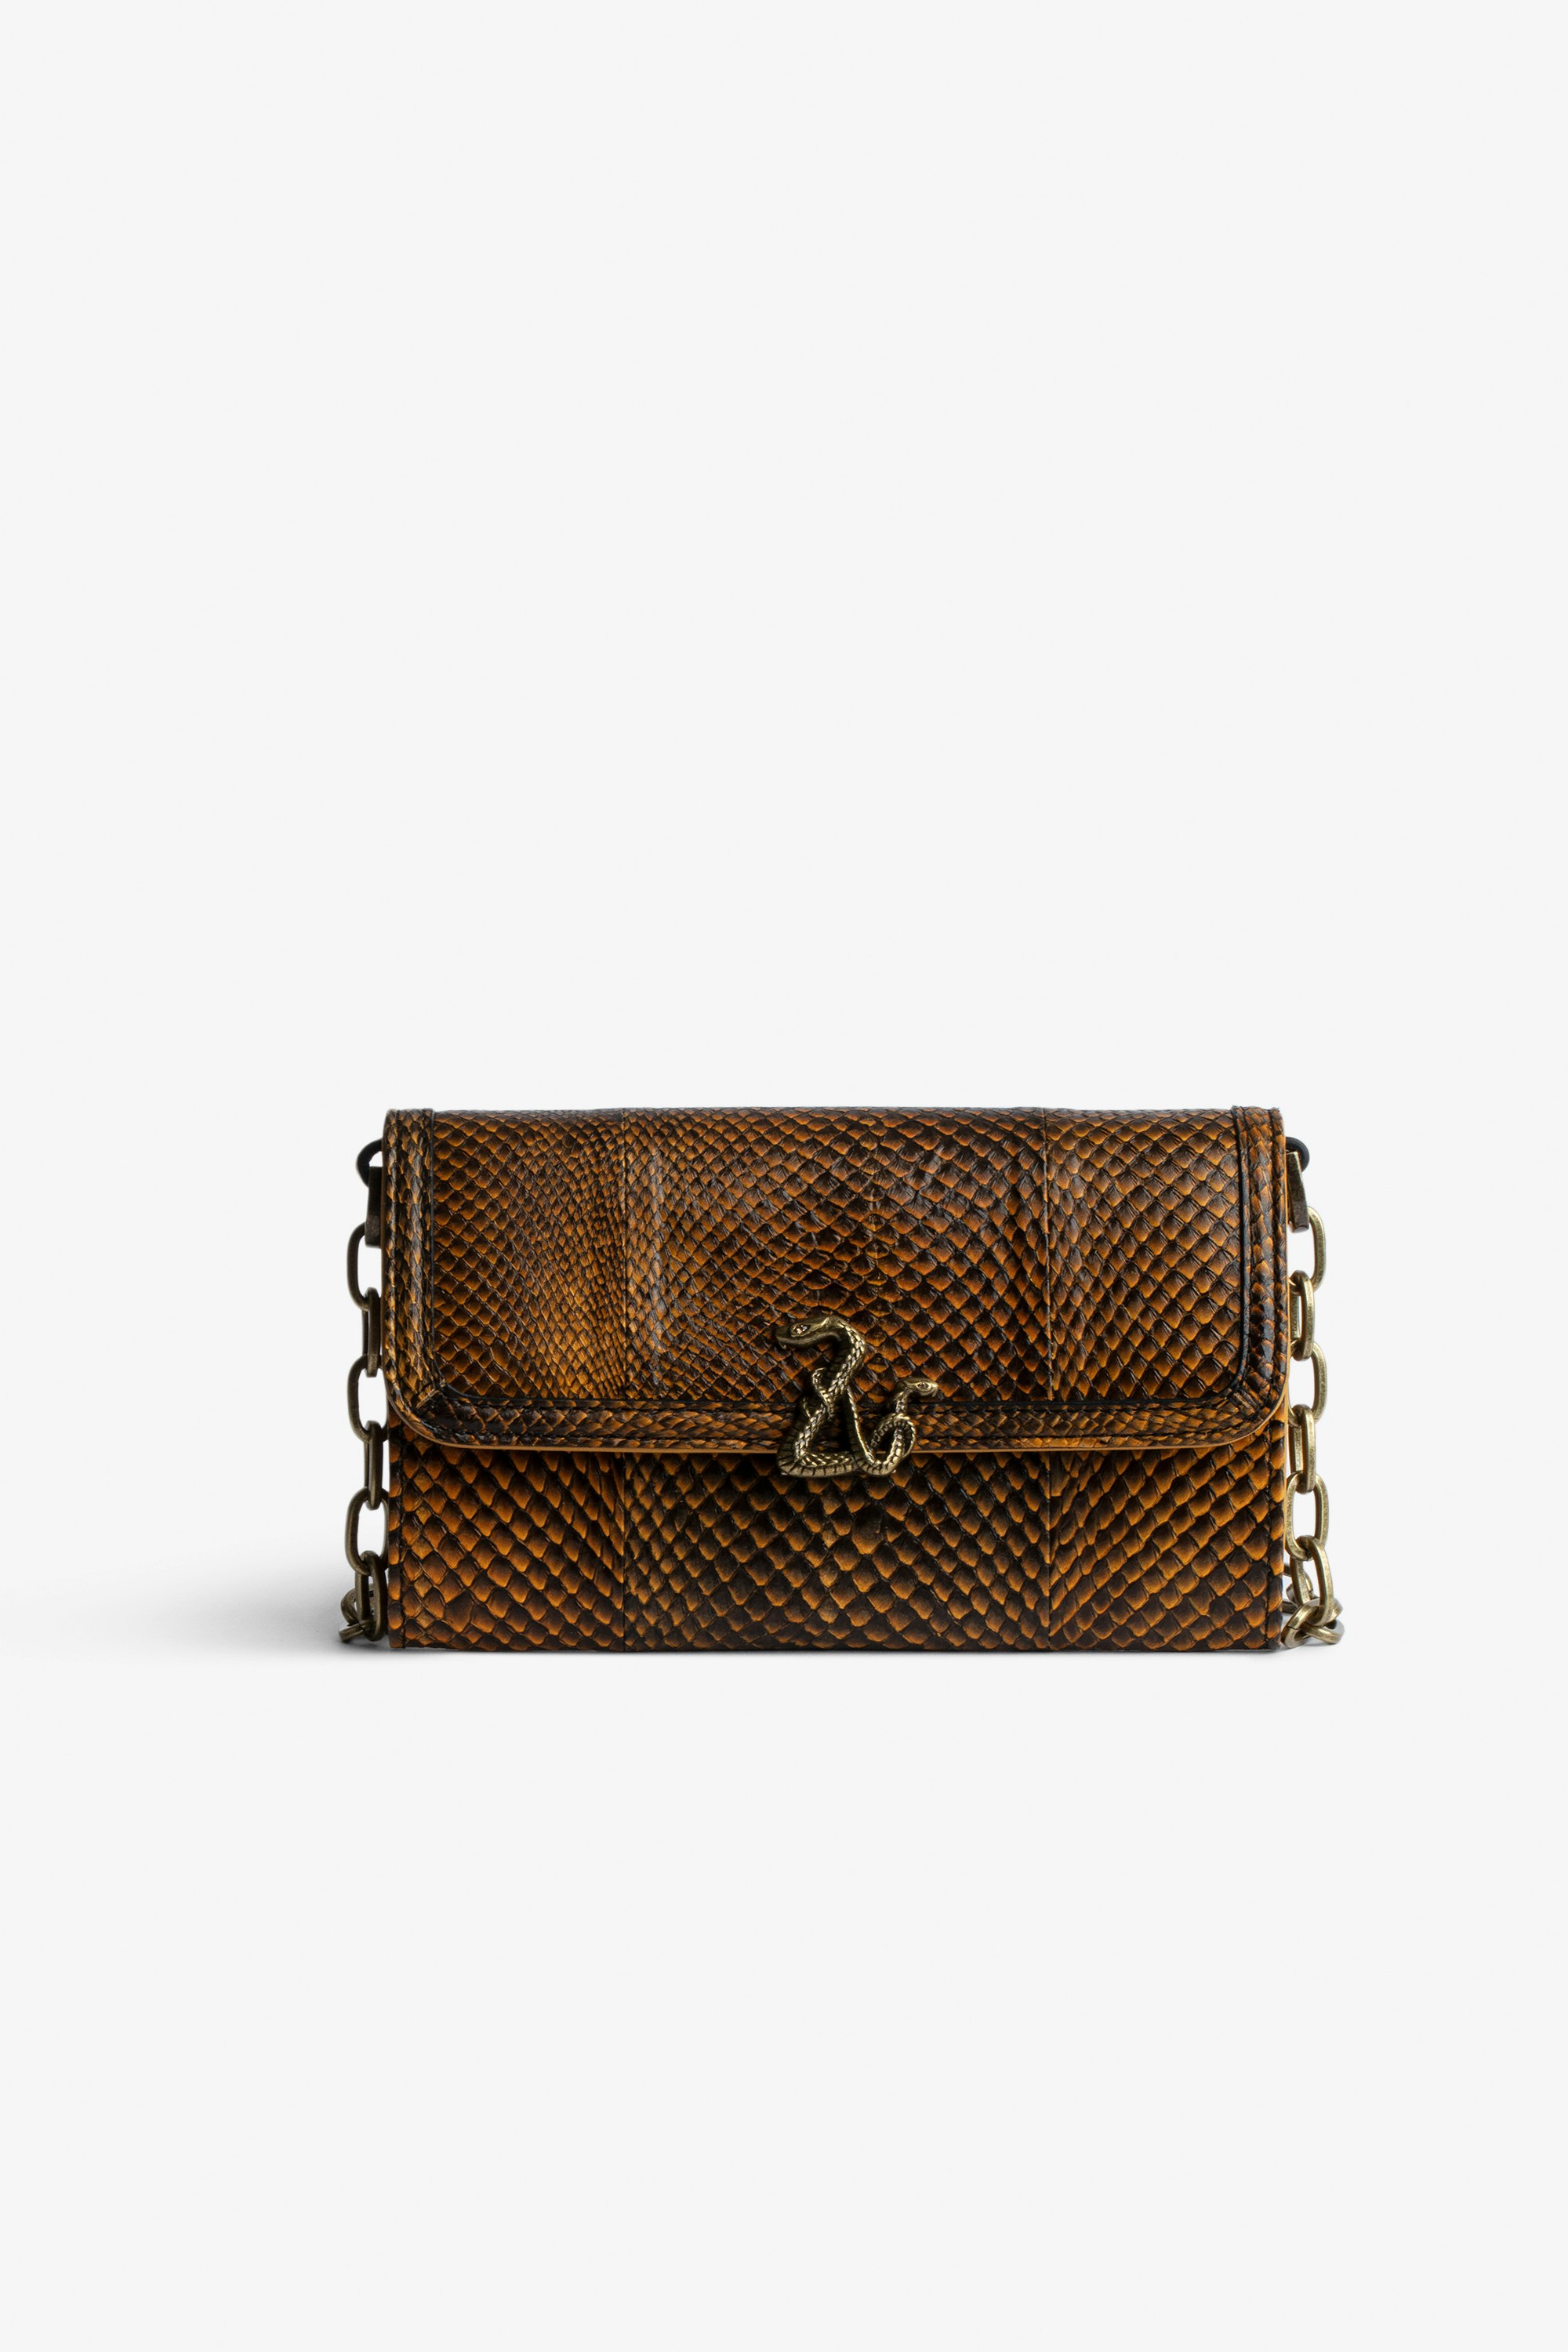 ZV Snake Le Long Wallet Women’s gold python-embossed leather wallet with ZV snake